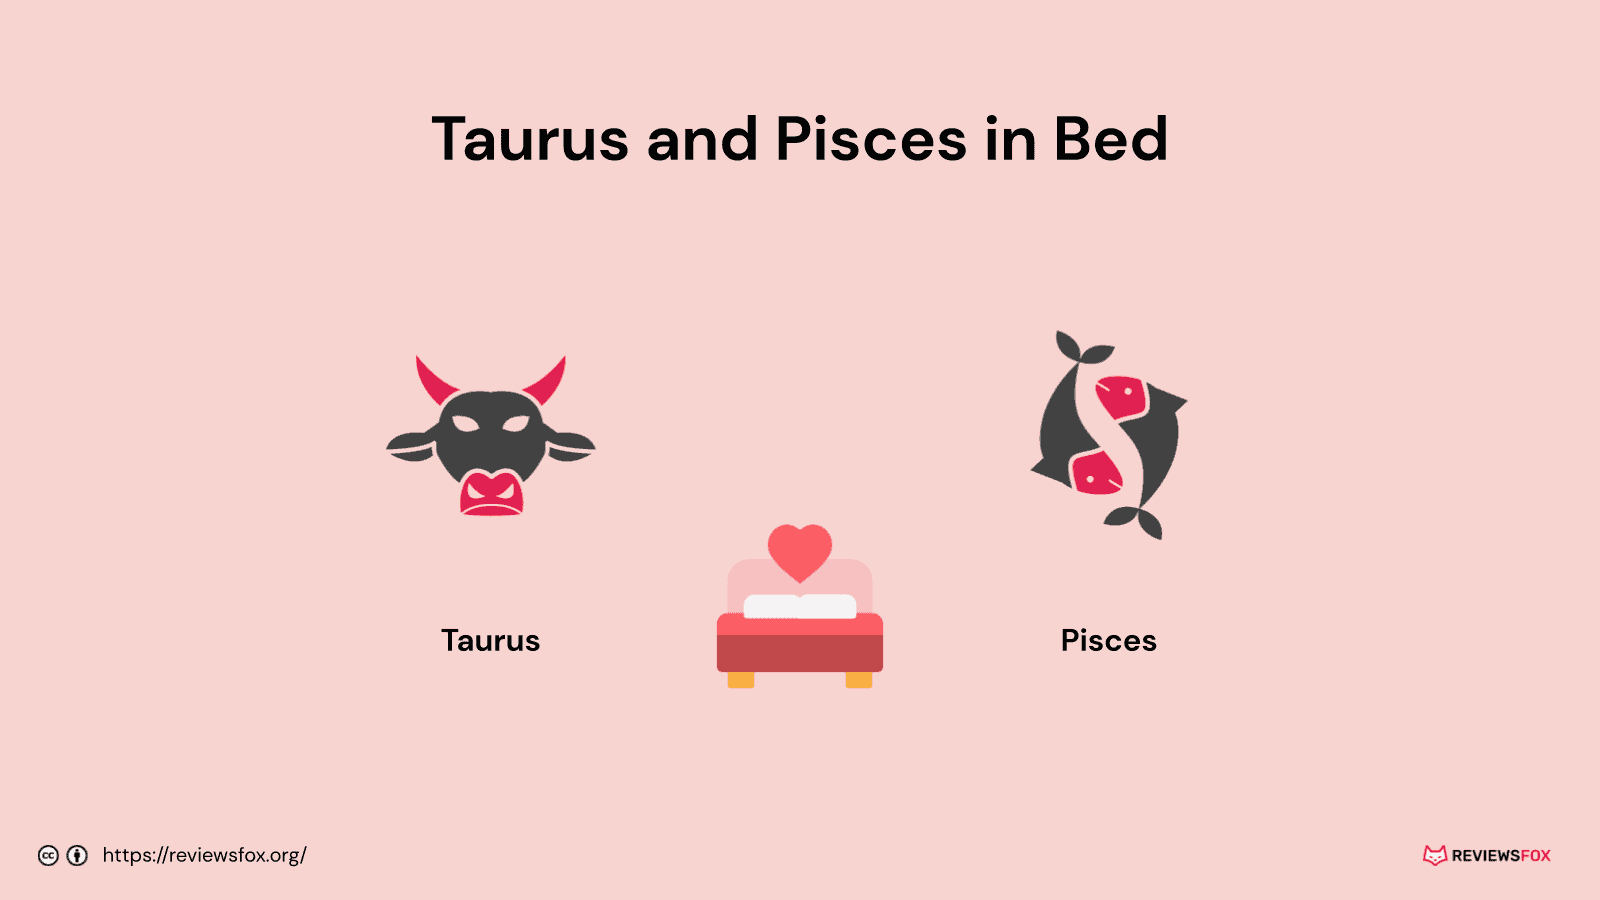 Taurus and Pisces in bed